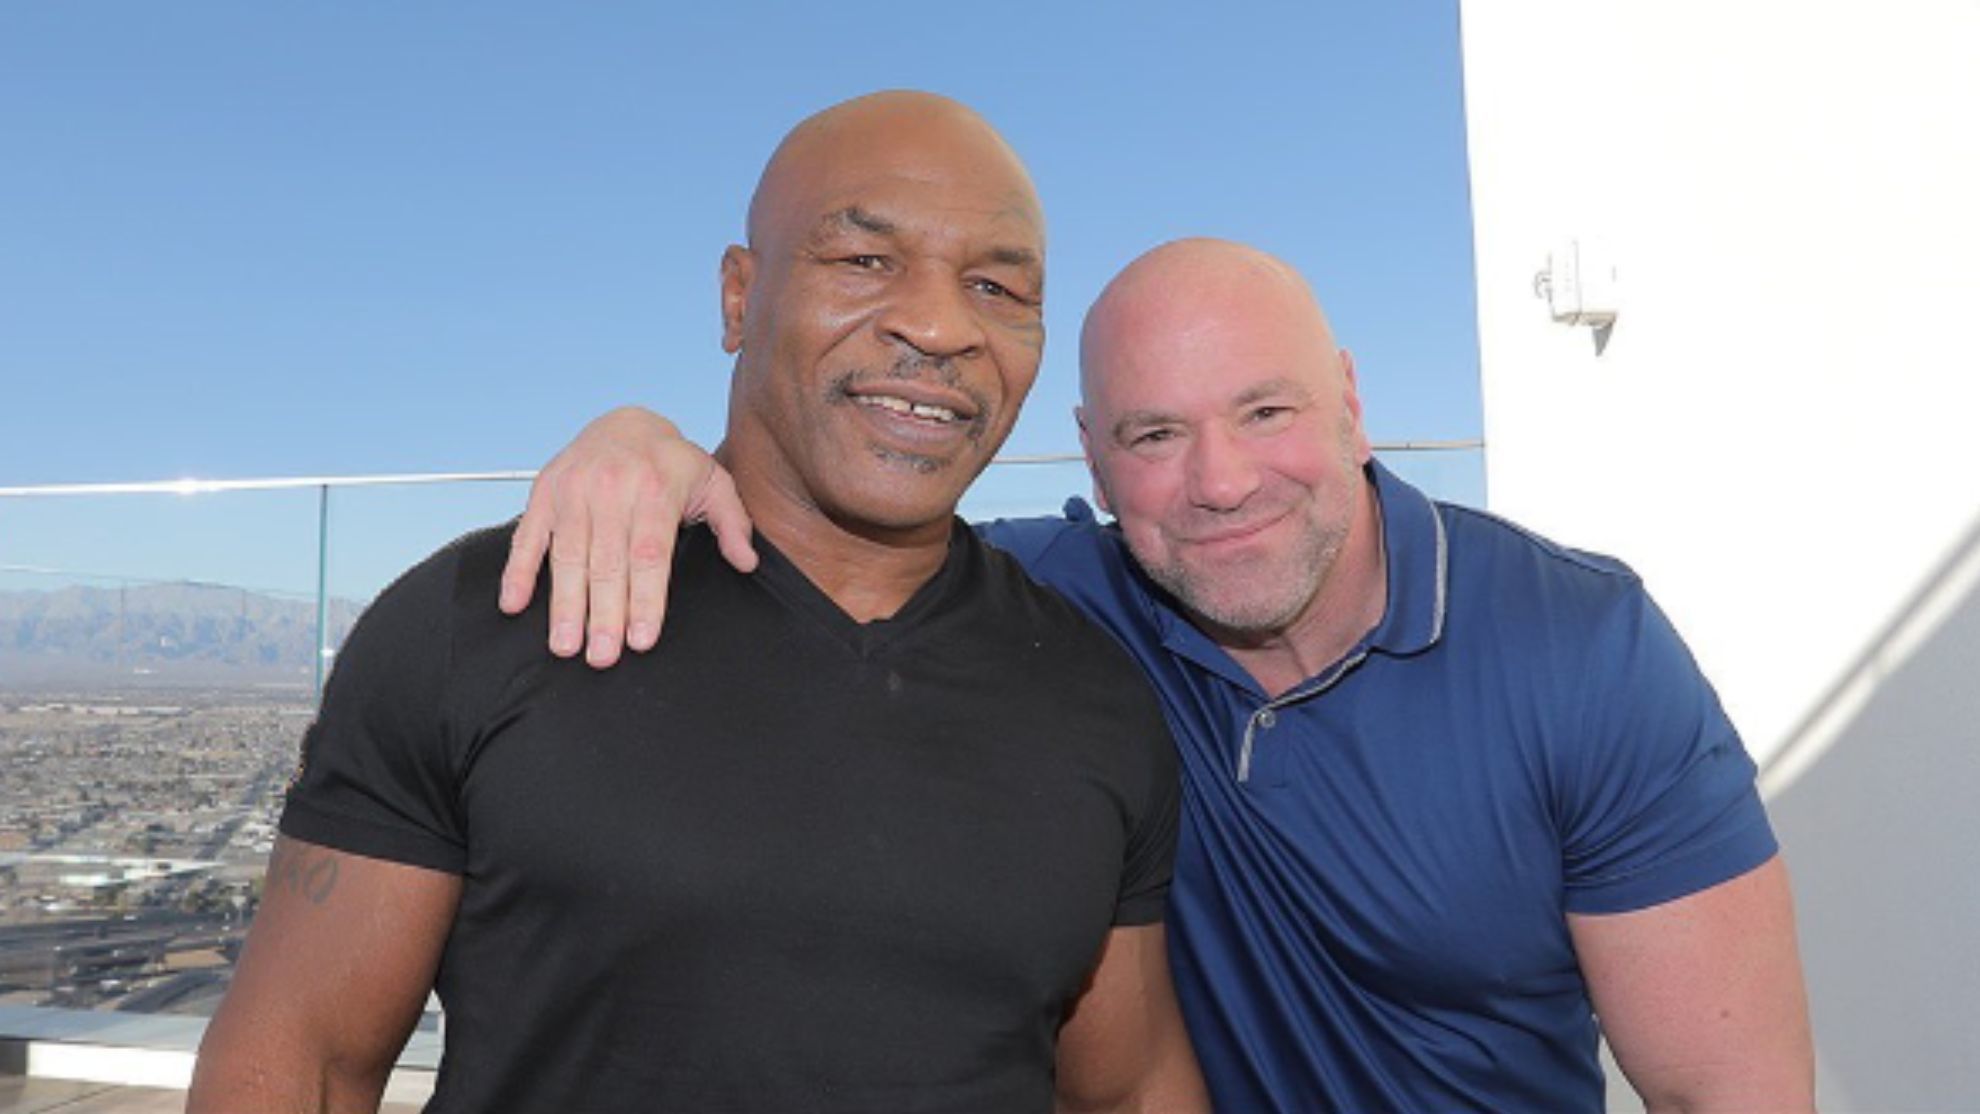 Mike Tyson (left) and Dana White (right)